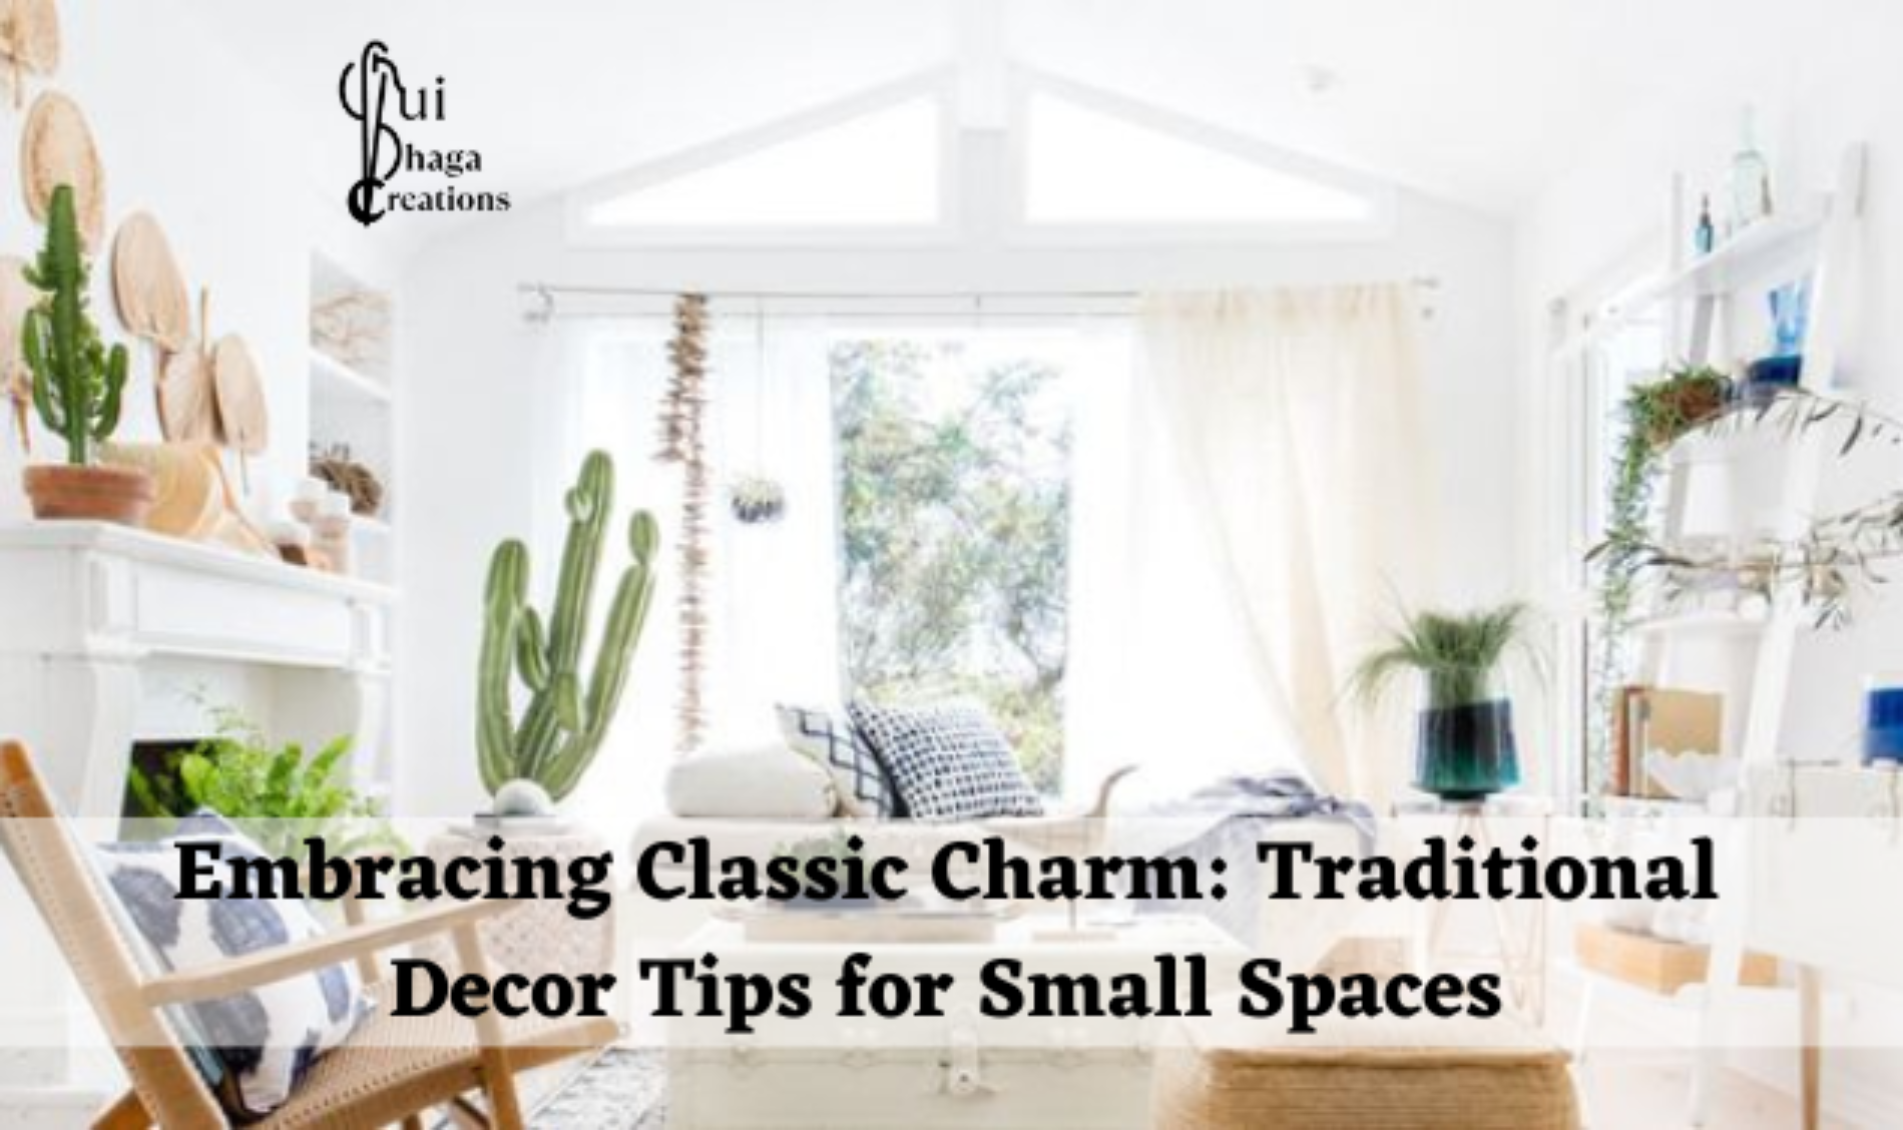 Embracing Classic Charm: Traditional Decor Tips for Small Spaces